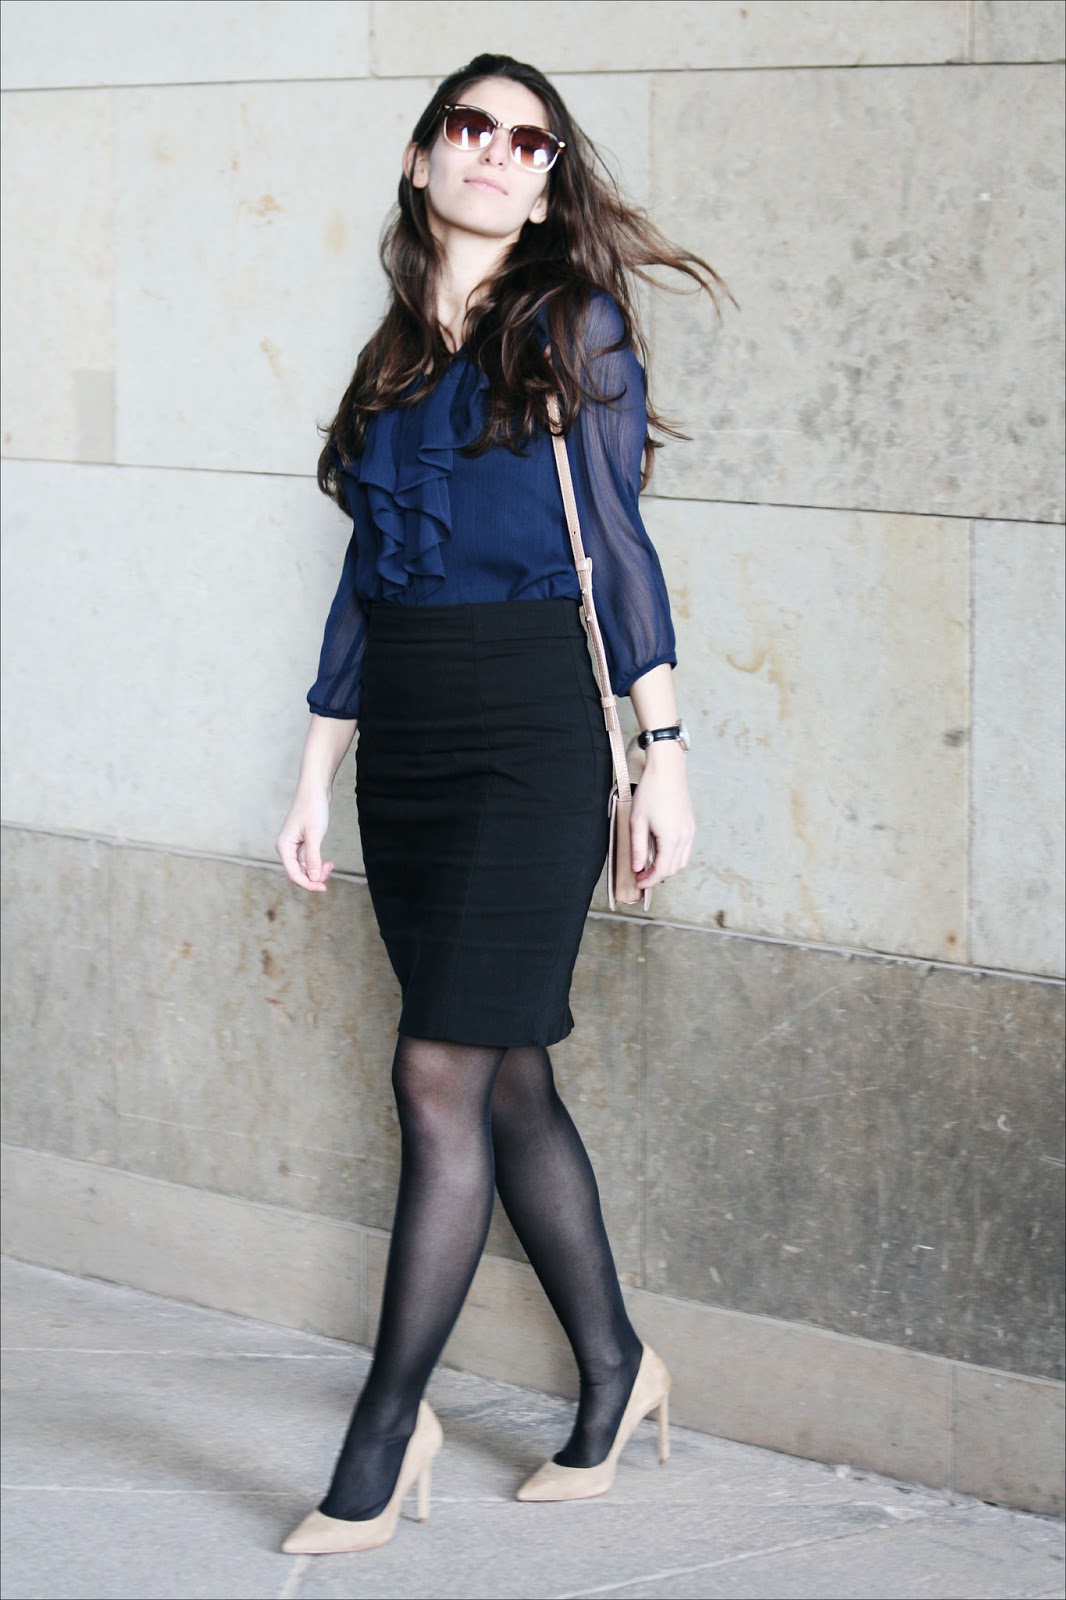 A springtime story - Fashionmylegs : The tights and hosiery blog